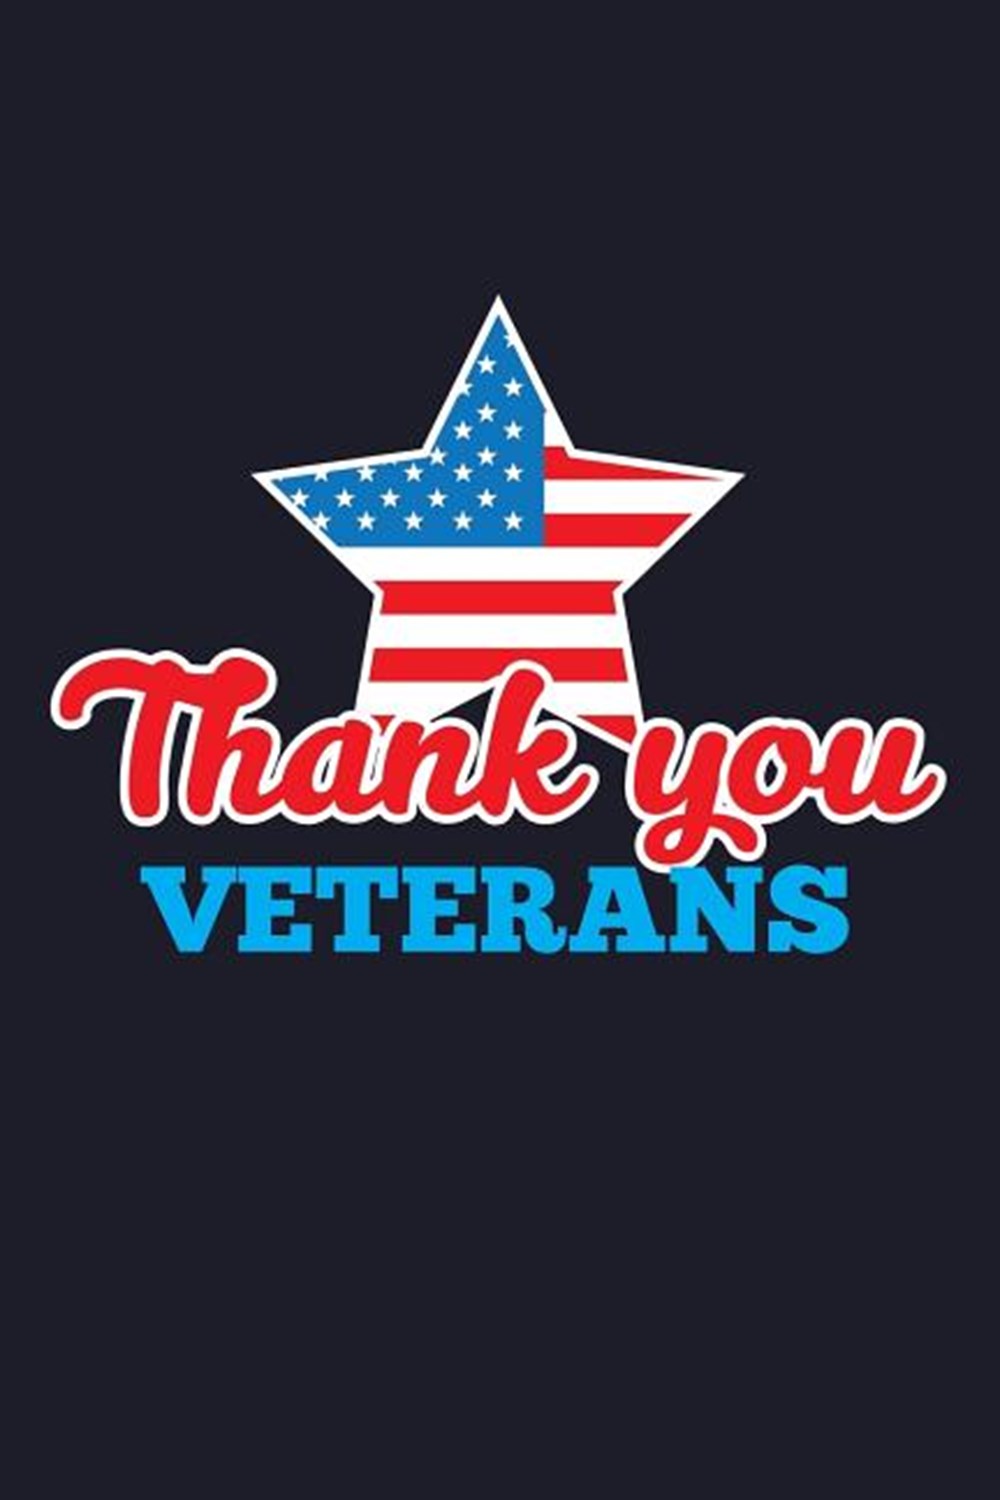 Thank You Veterans Blank Paper Sketch Book - Artist Sketch Pad Journal for Sketching, Doodling, Draw